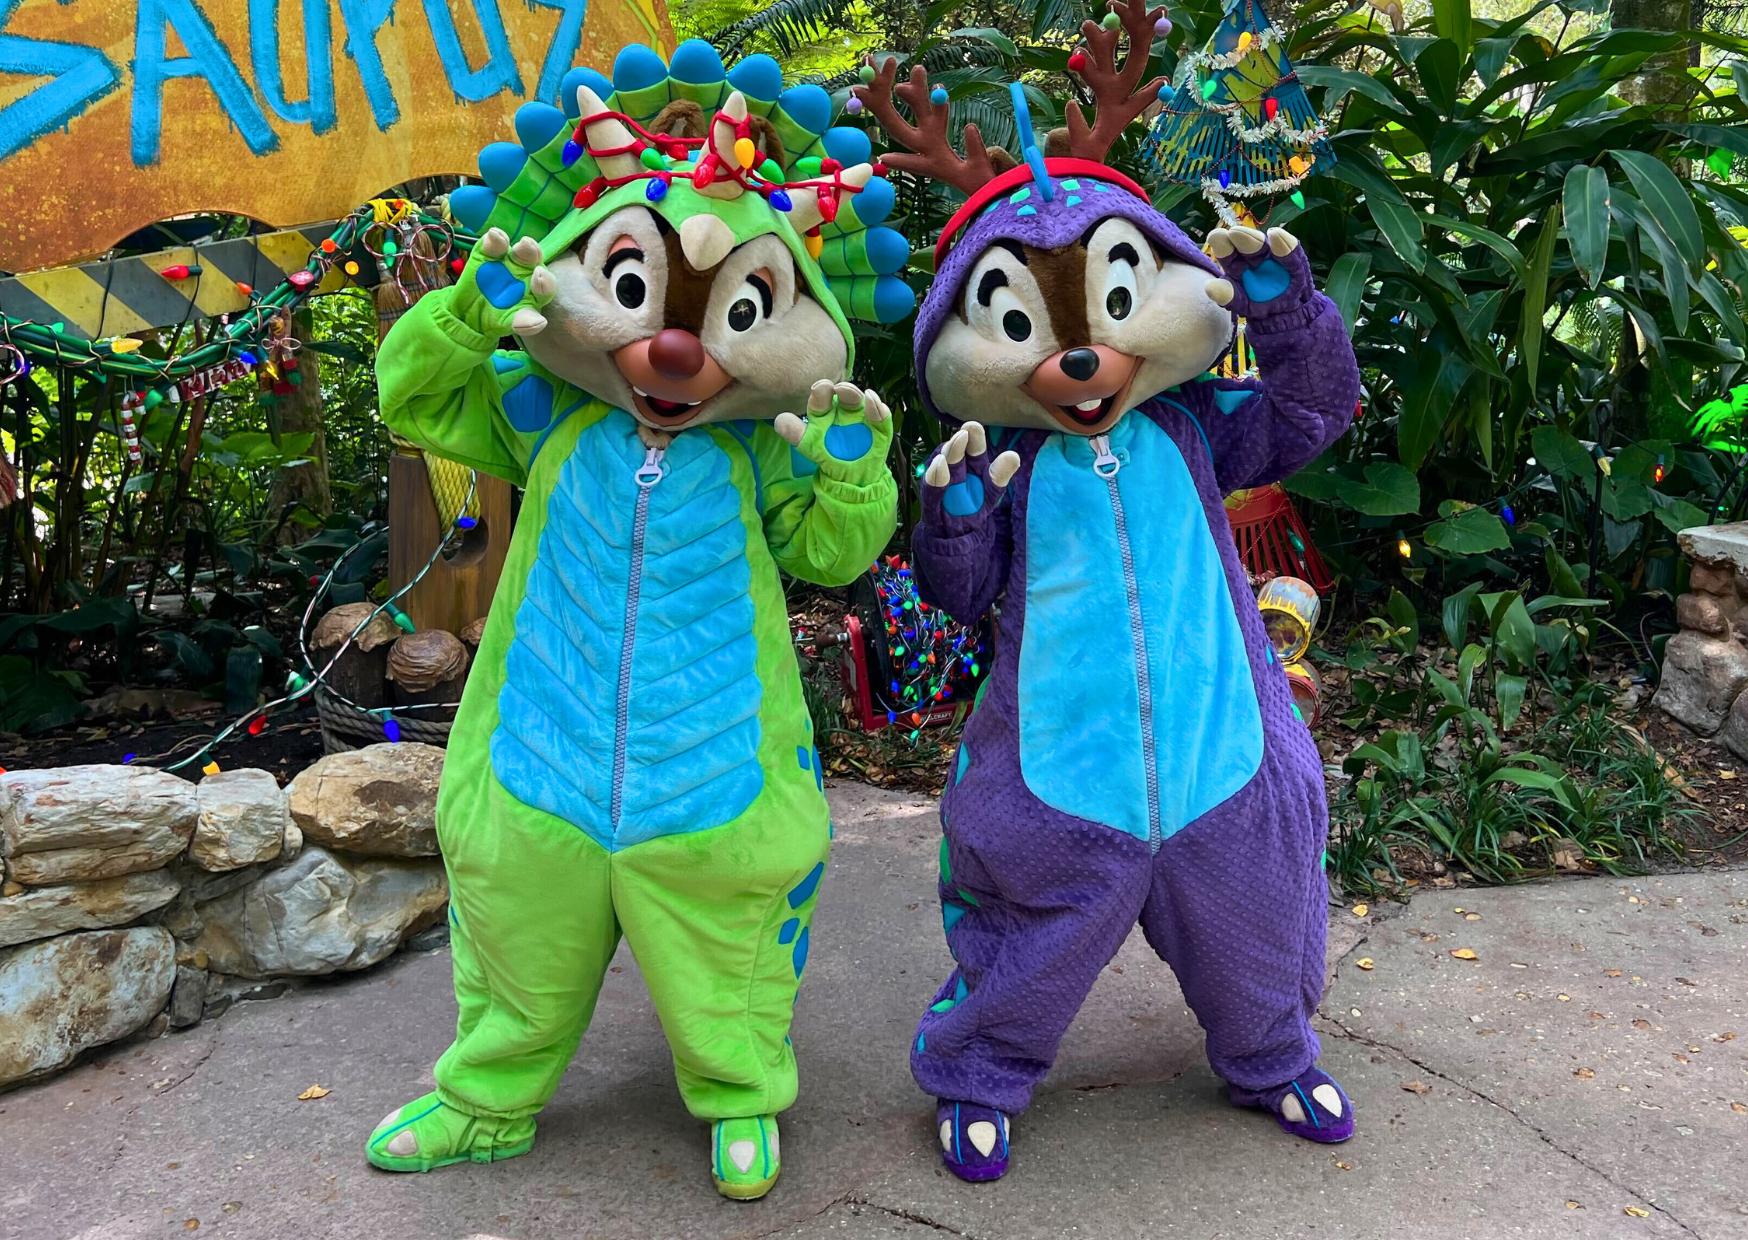 Chip 'n Dale's Holiday Outfits